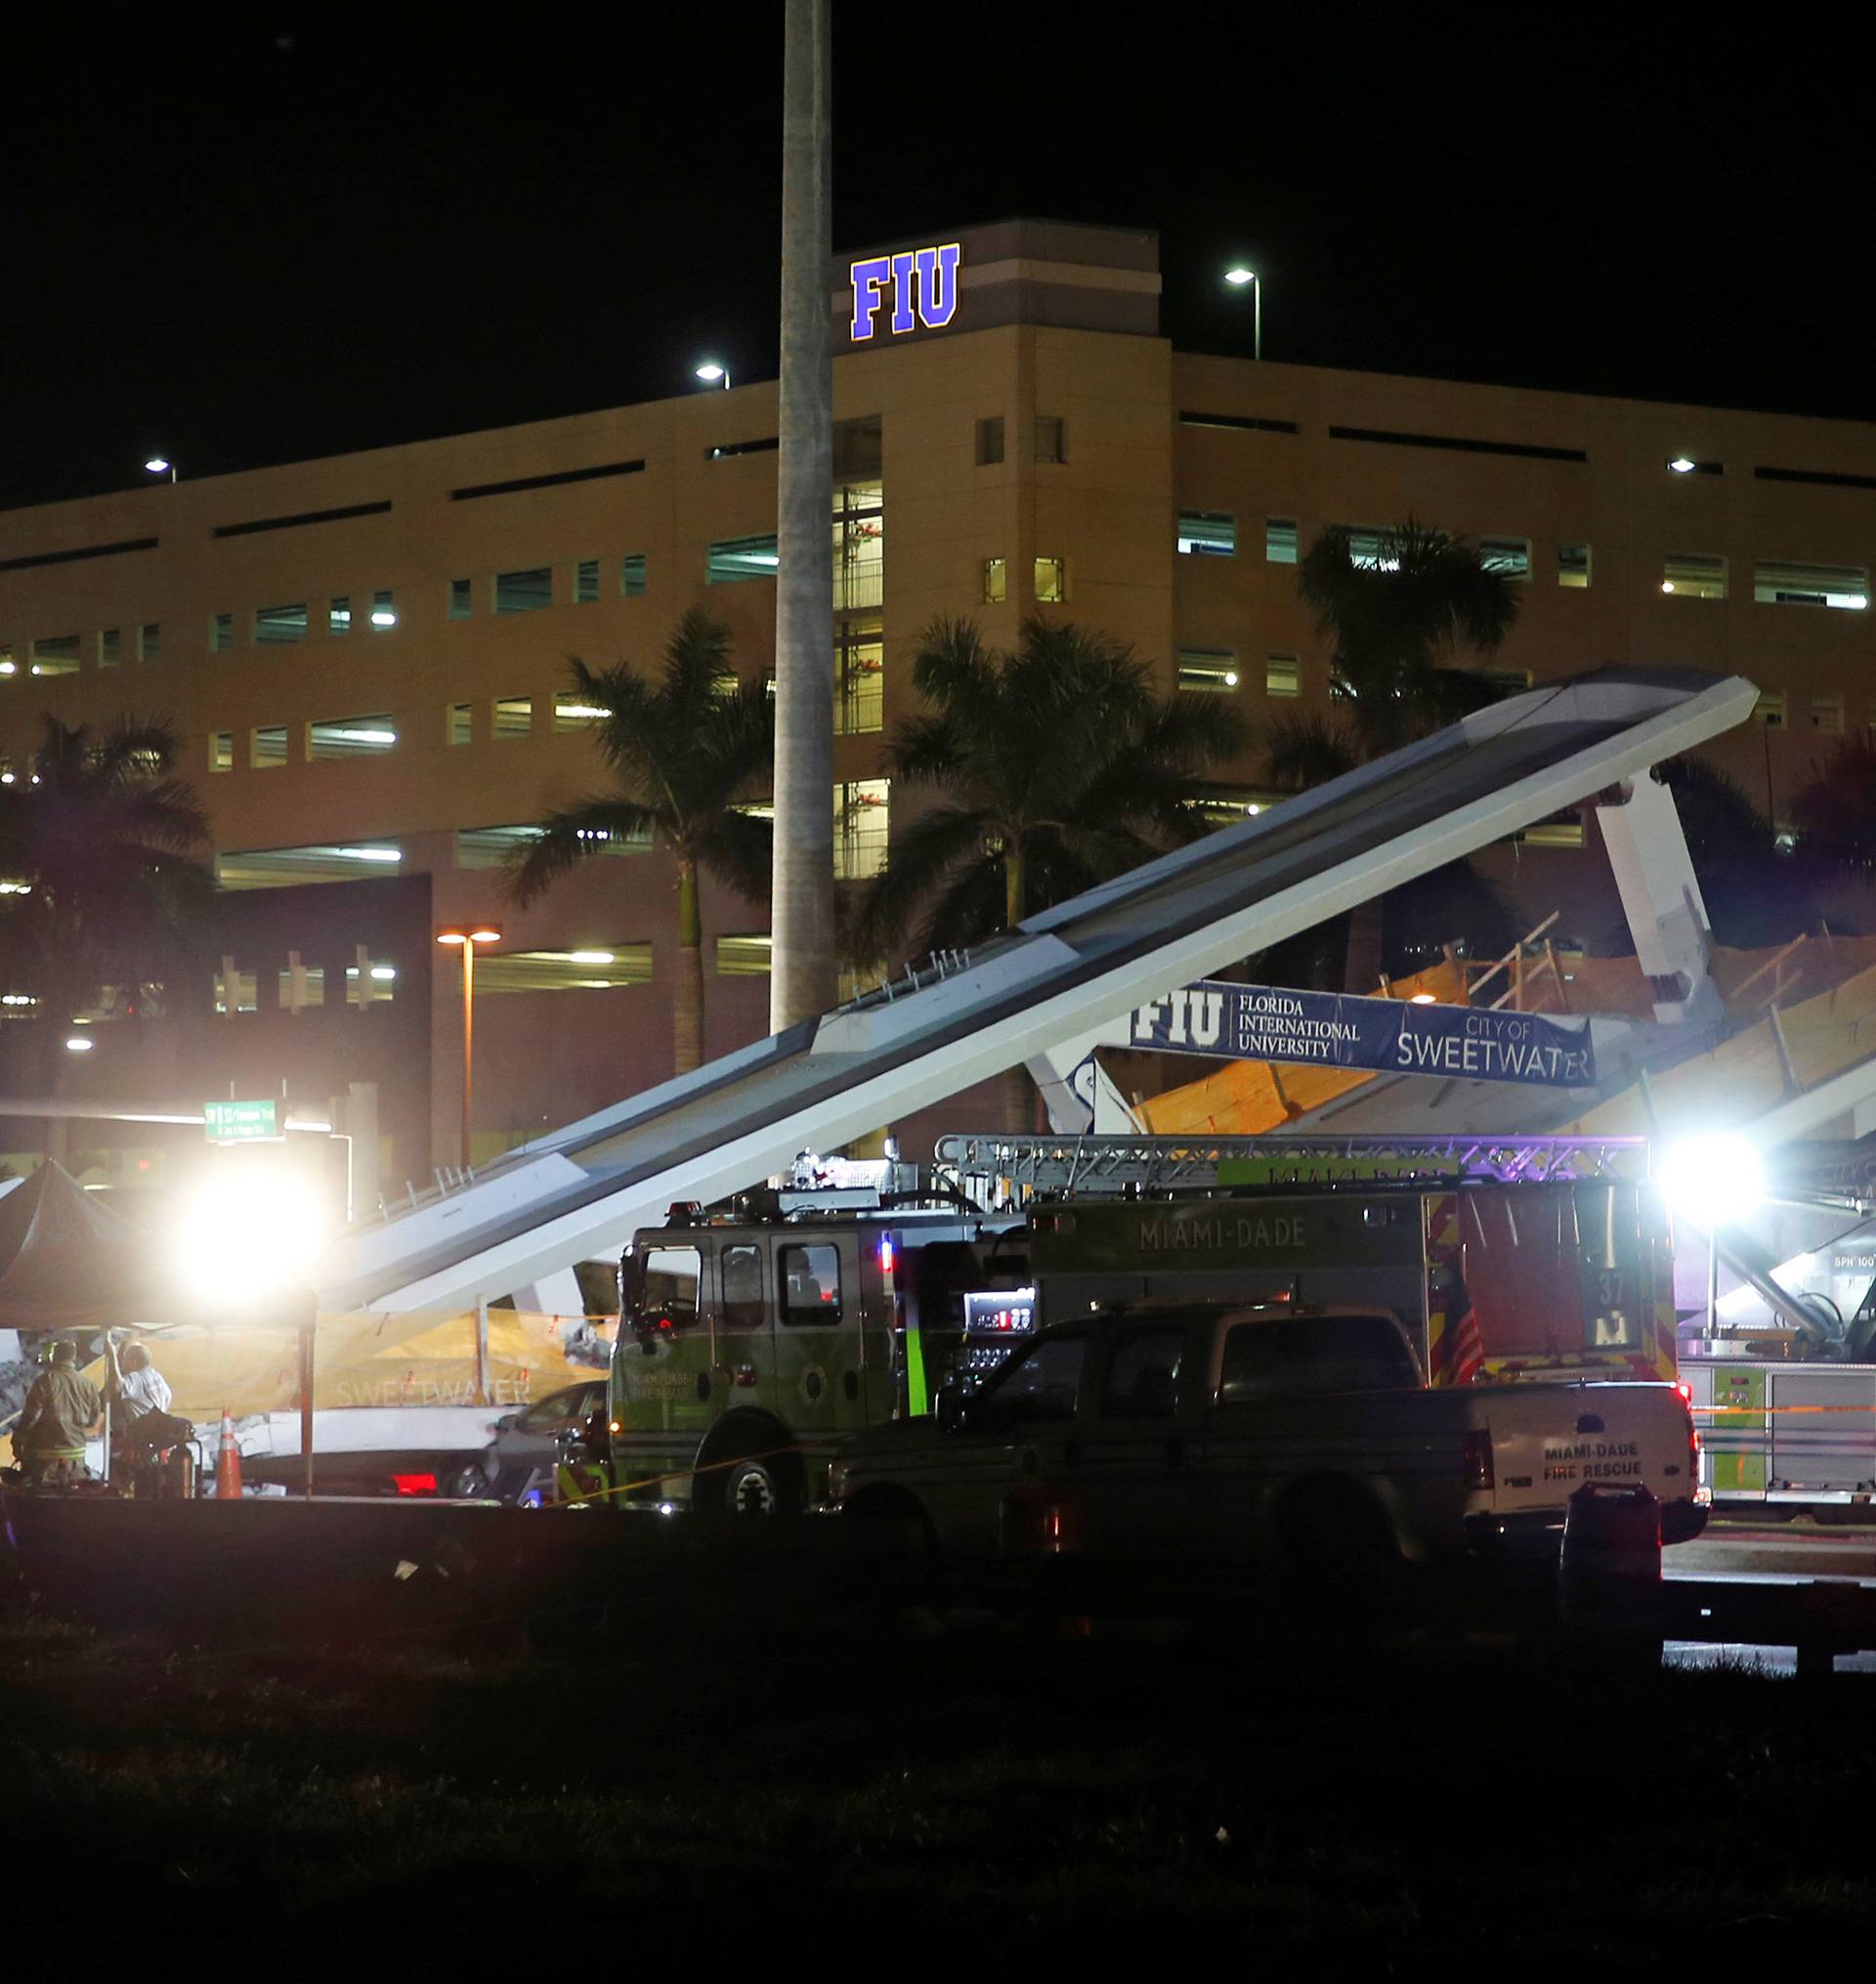 First responders are shown as rescue efforts continue after a pedestrian bridge collapsed at Florida International University in Miami